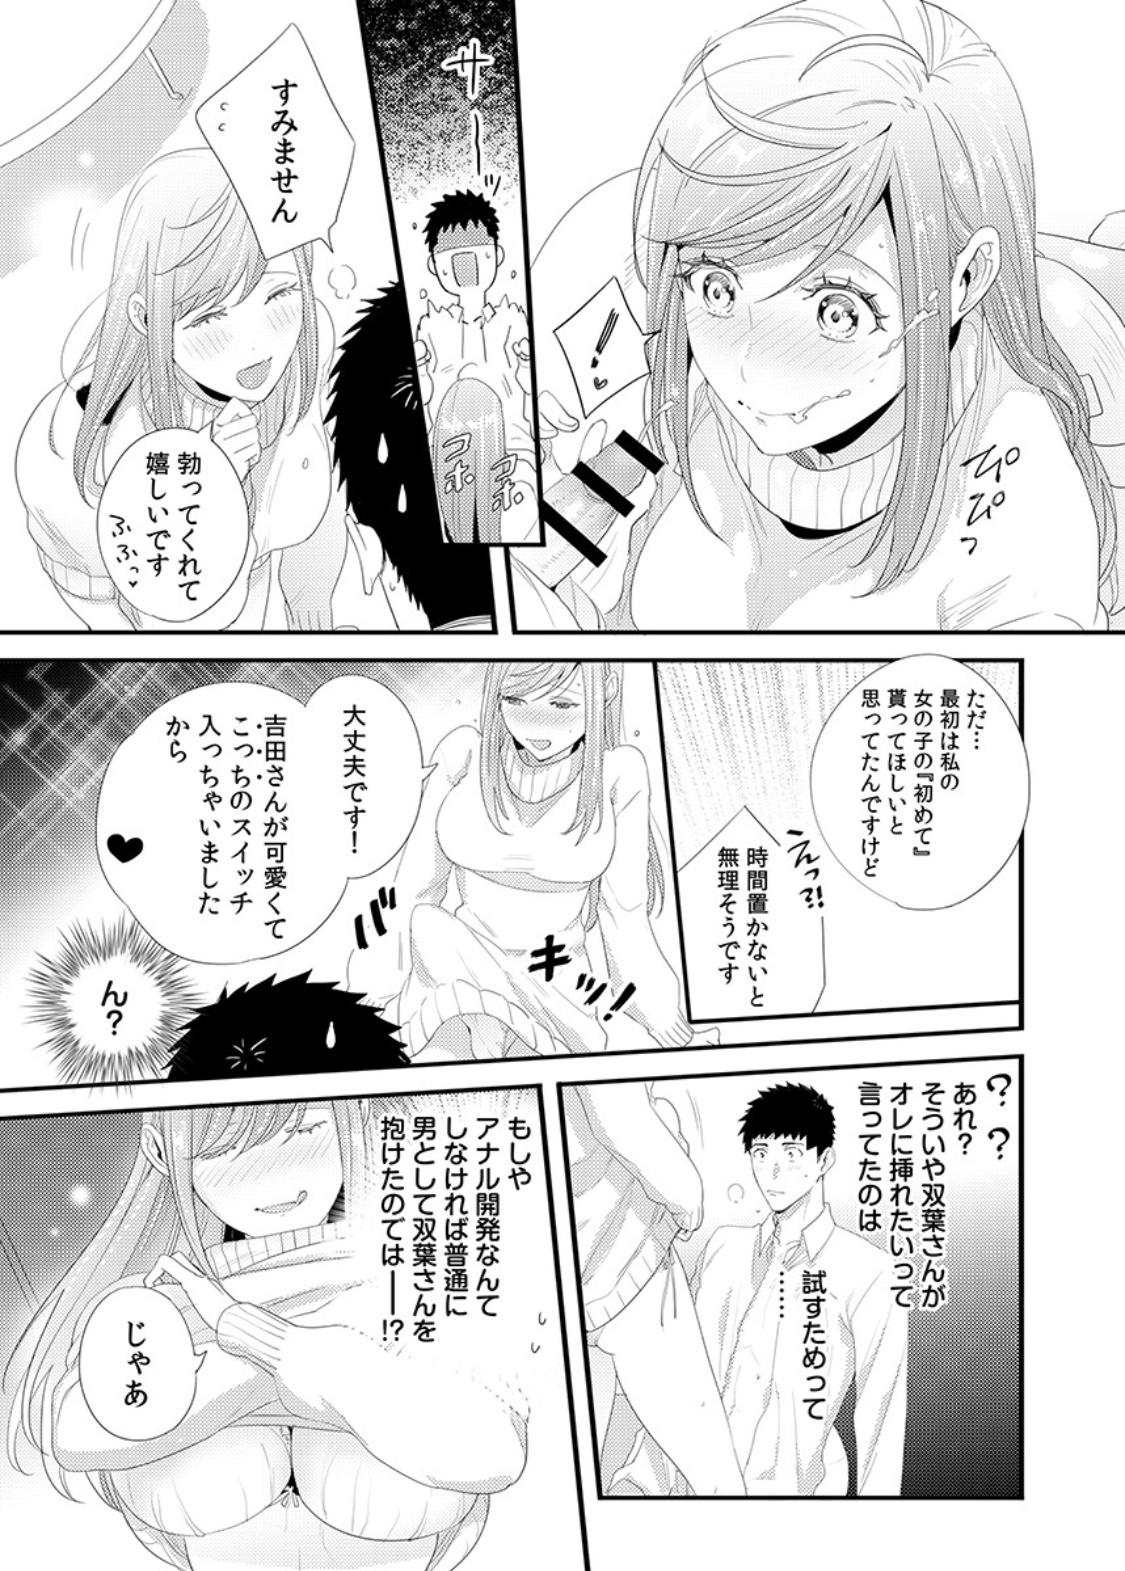 Please Let Me Hold You Futaba-San! Ch. 1+2 50